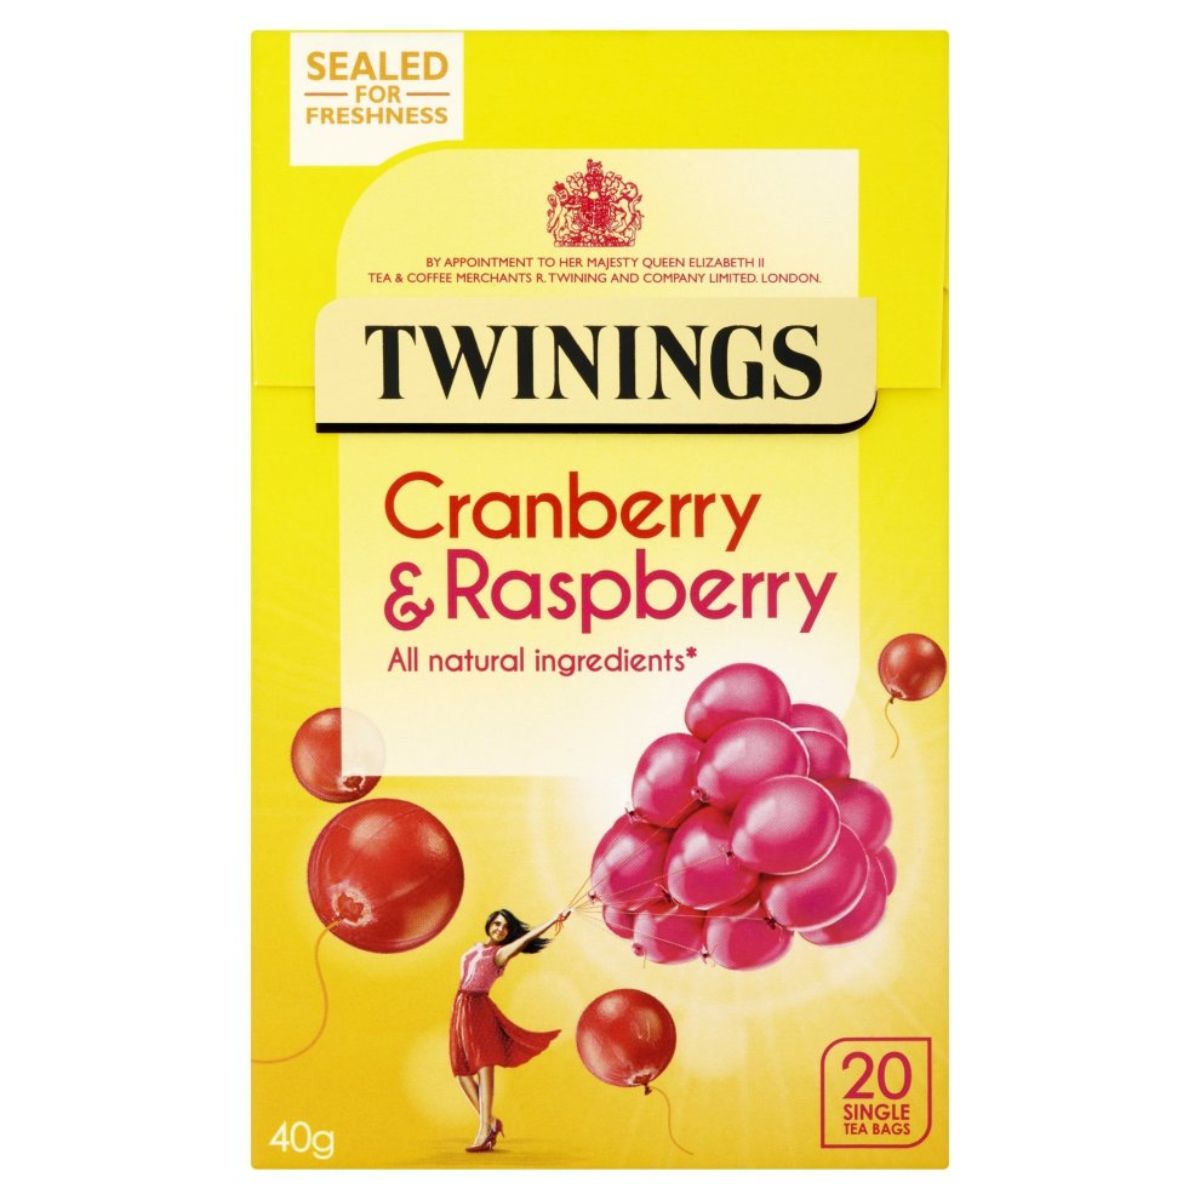 Twinings - Cranberry & Raspberry 20 Teabags - 40g.